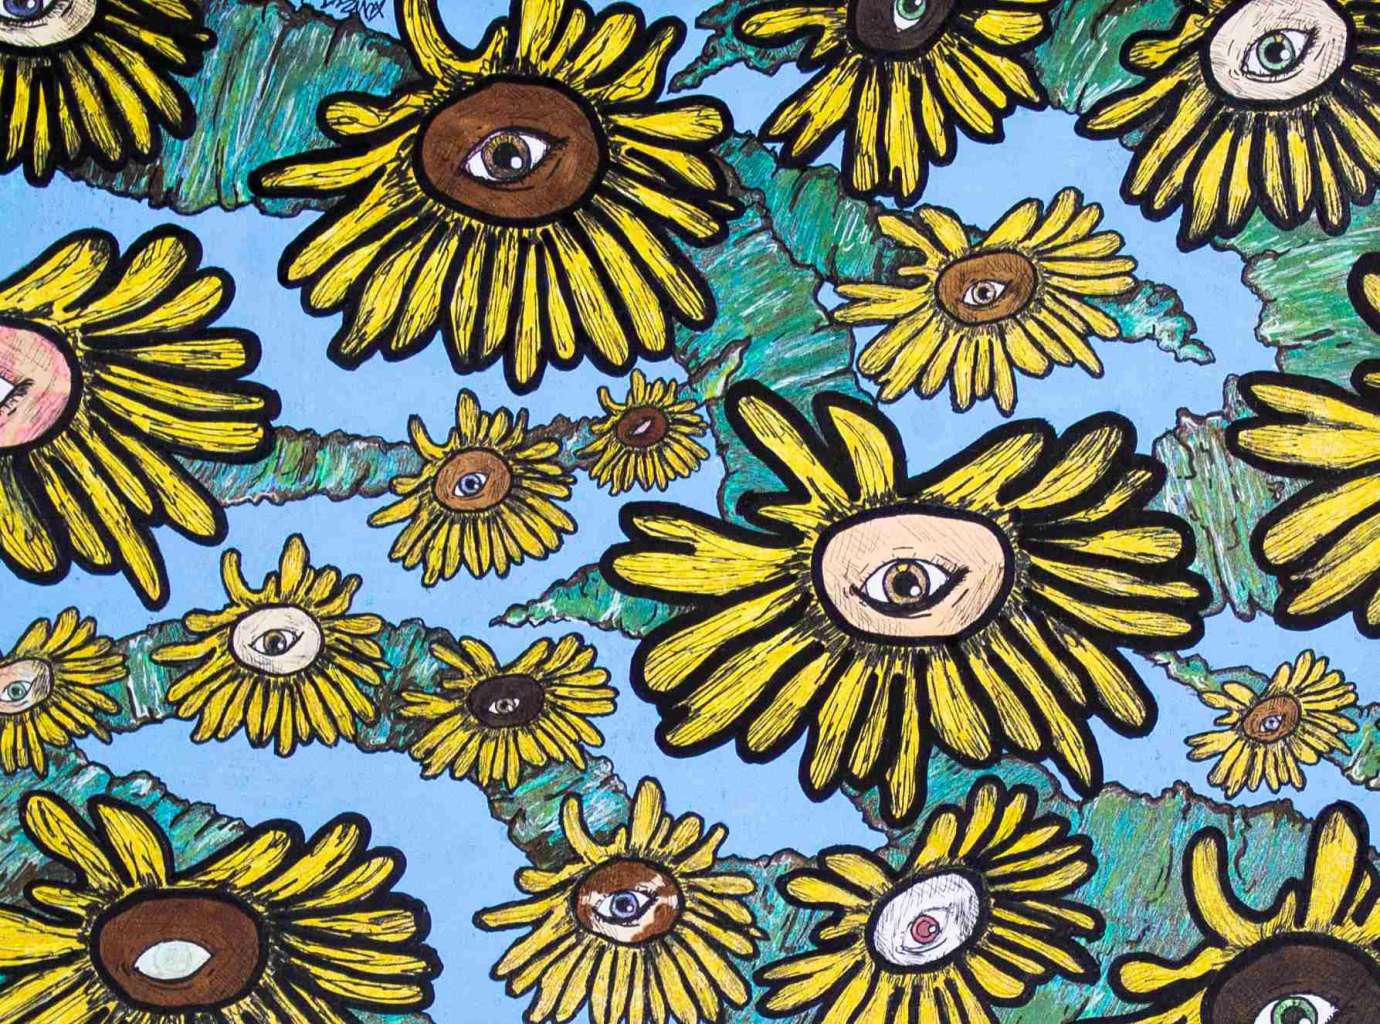 sunflowers on a blue background, in the center of the sunflower is a different colored human eye